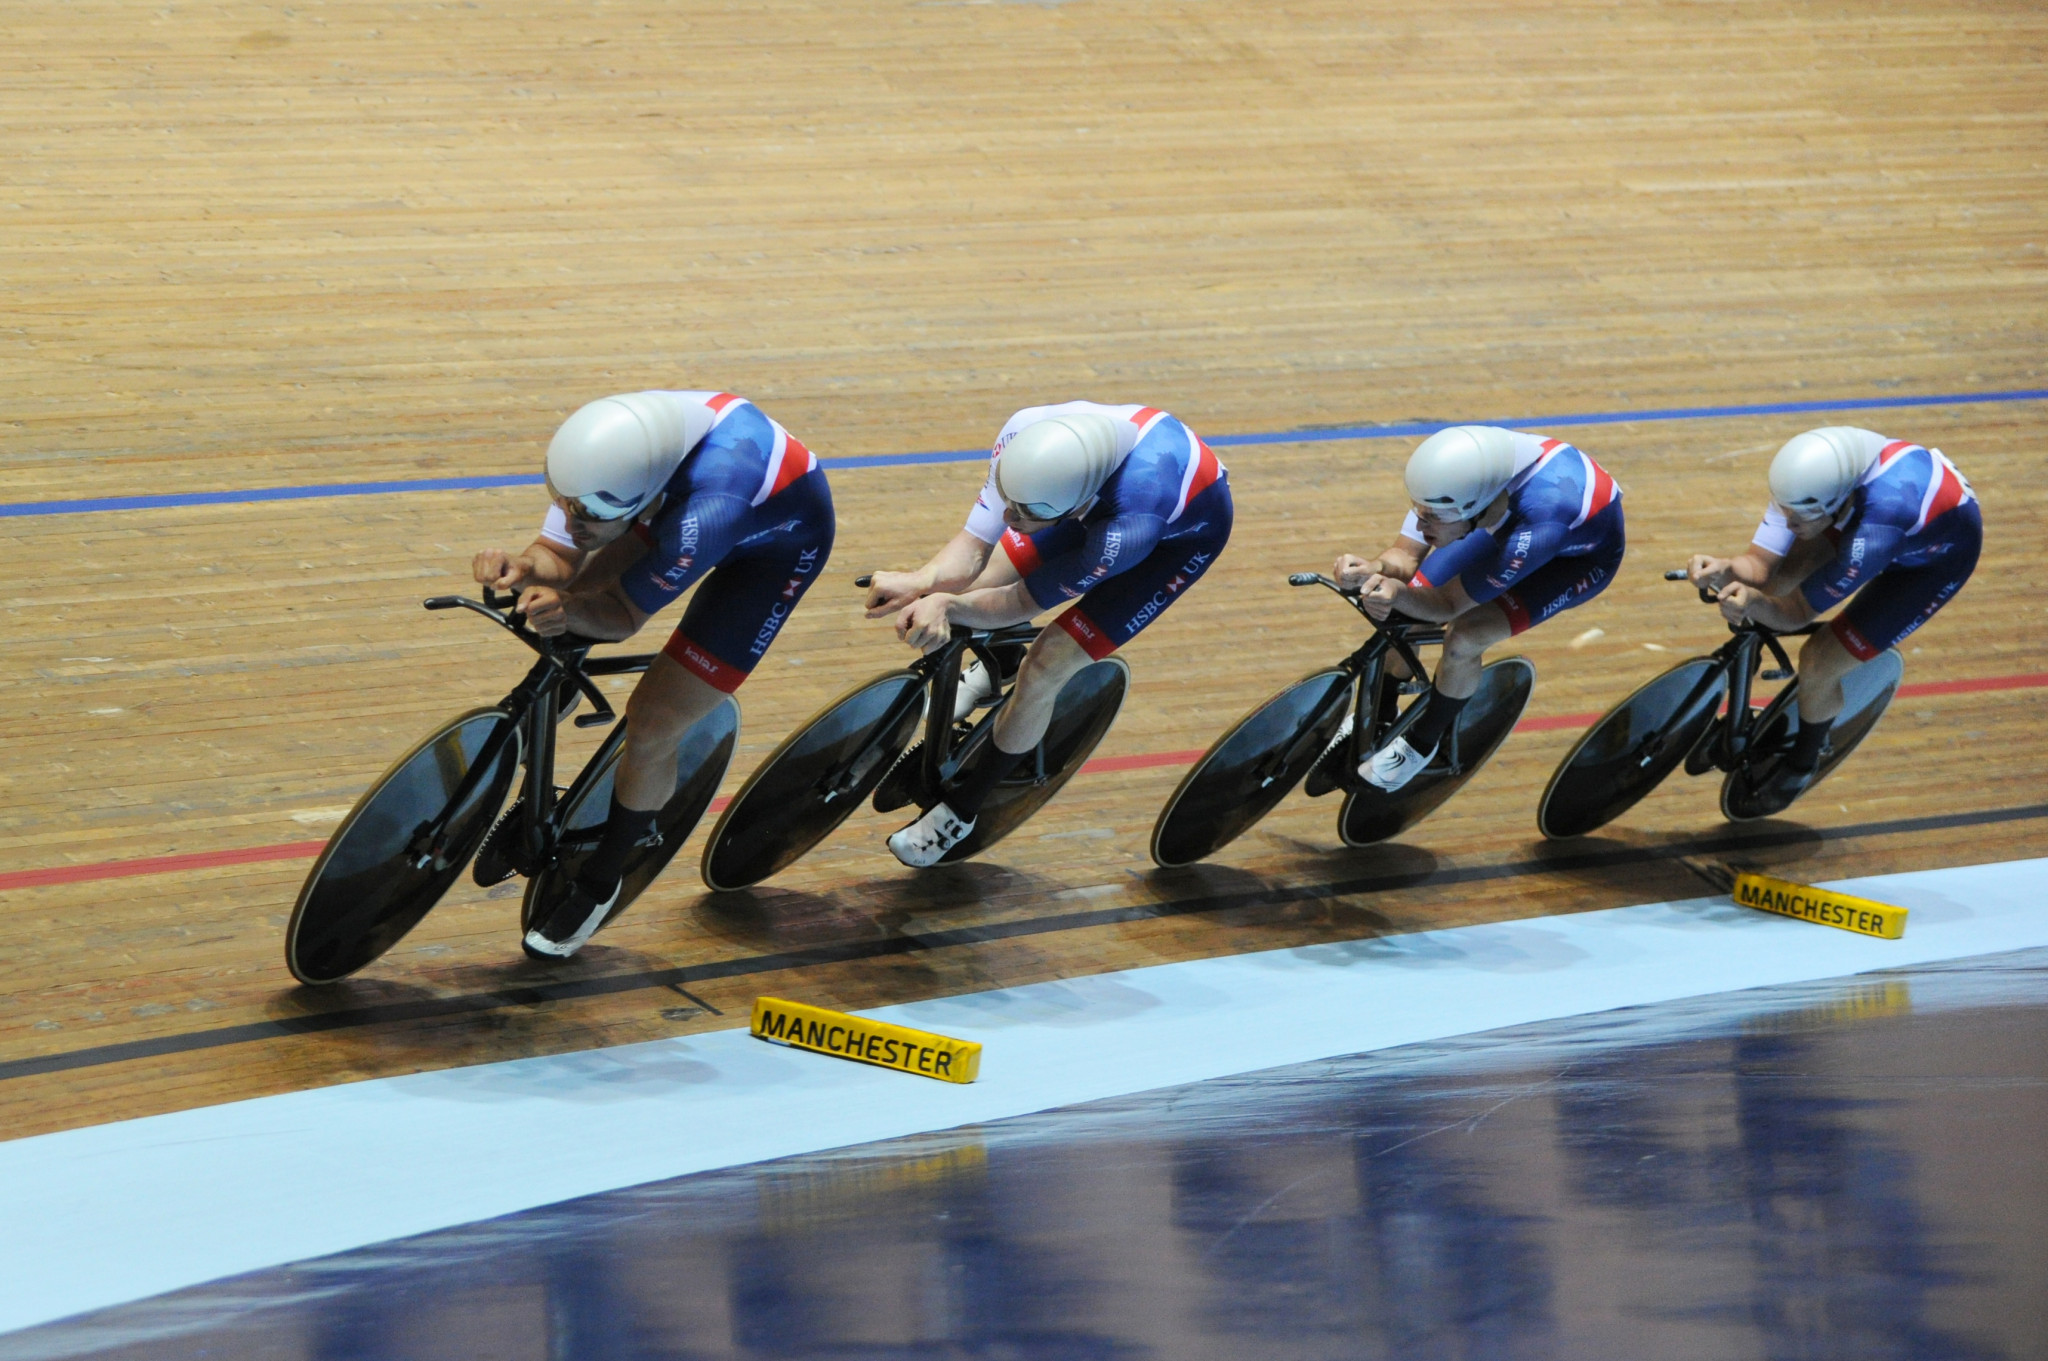 Hosts celebrate double gold on second day at UCI Track Cycling World Cup in Manchester